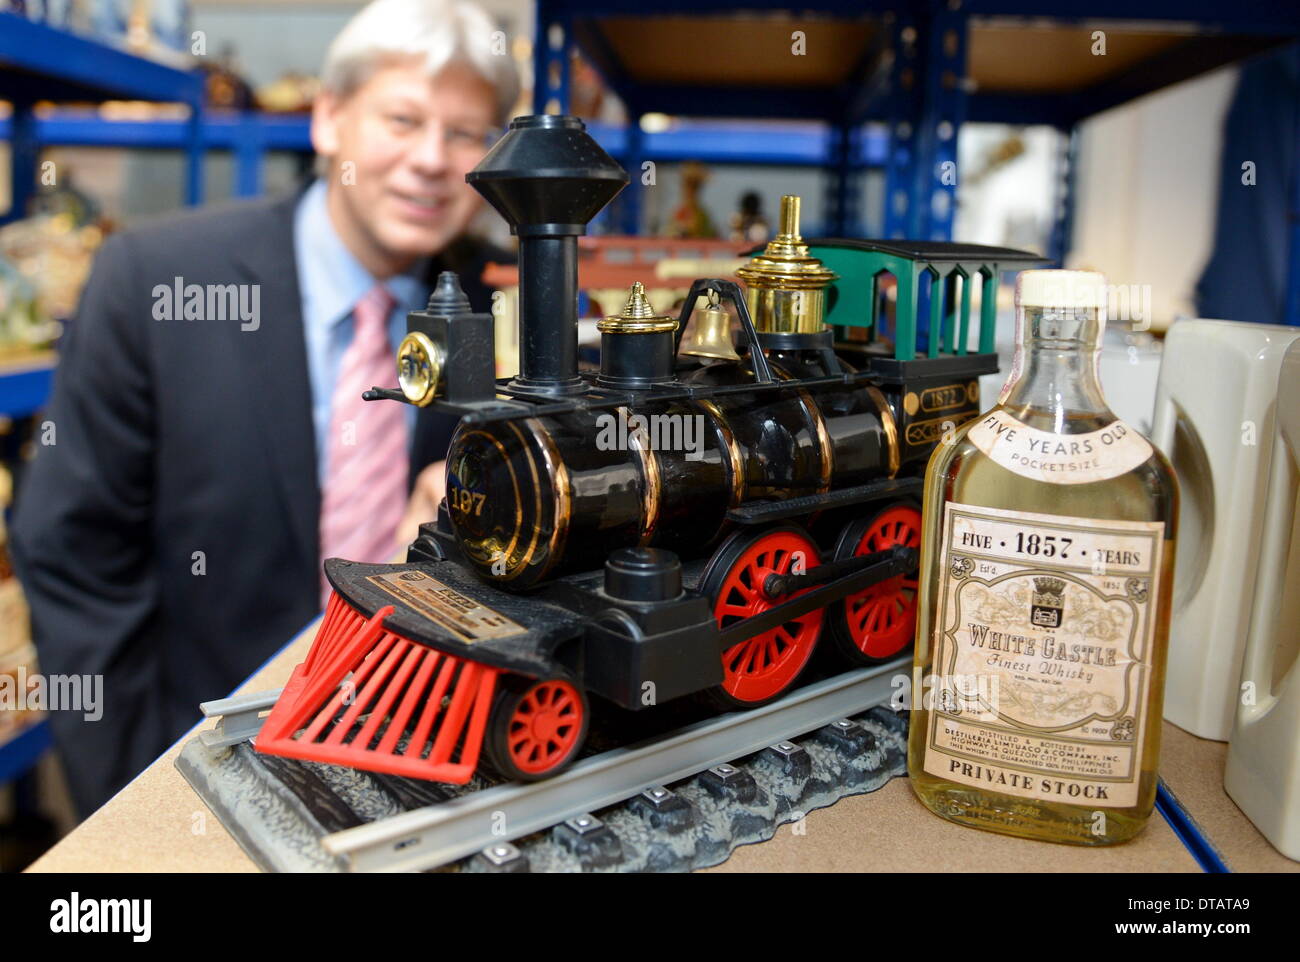 Bietigheim-Bissingen, Germany. 09th Feb, 2014. Auctioneer Christoph Gaertner is pictured in front of a model train filled with whisky in a storage room of his auction house in Bietigheim-Bissingen, Germany, 09 February 2014. The model is part of the biggest private collection of whisky bottles in Europe, by his own account. The collection will be auctioned off on 14 February. The about 2600 bottles and unusual containers partly contain extremely rare whisky brands. Photo: BERND WEIßBROD/dpa/Alamy Live News Stock Photo